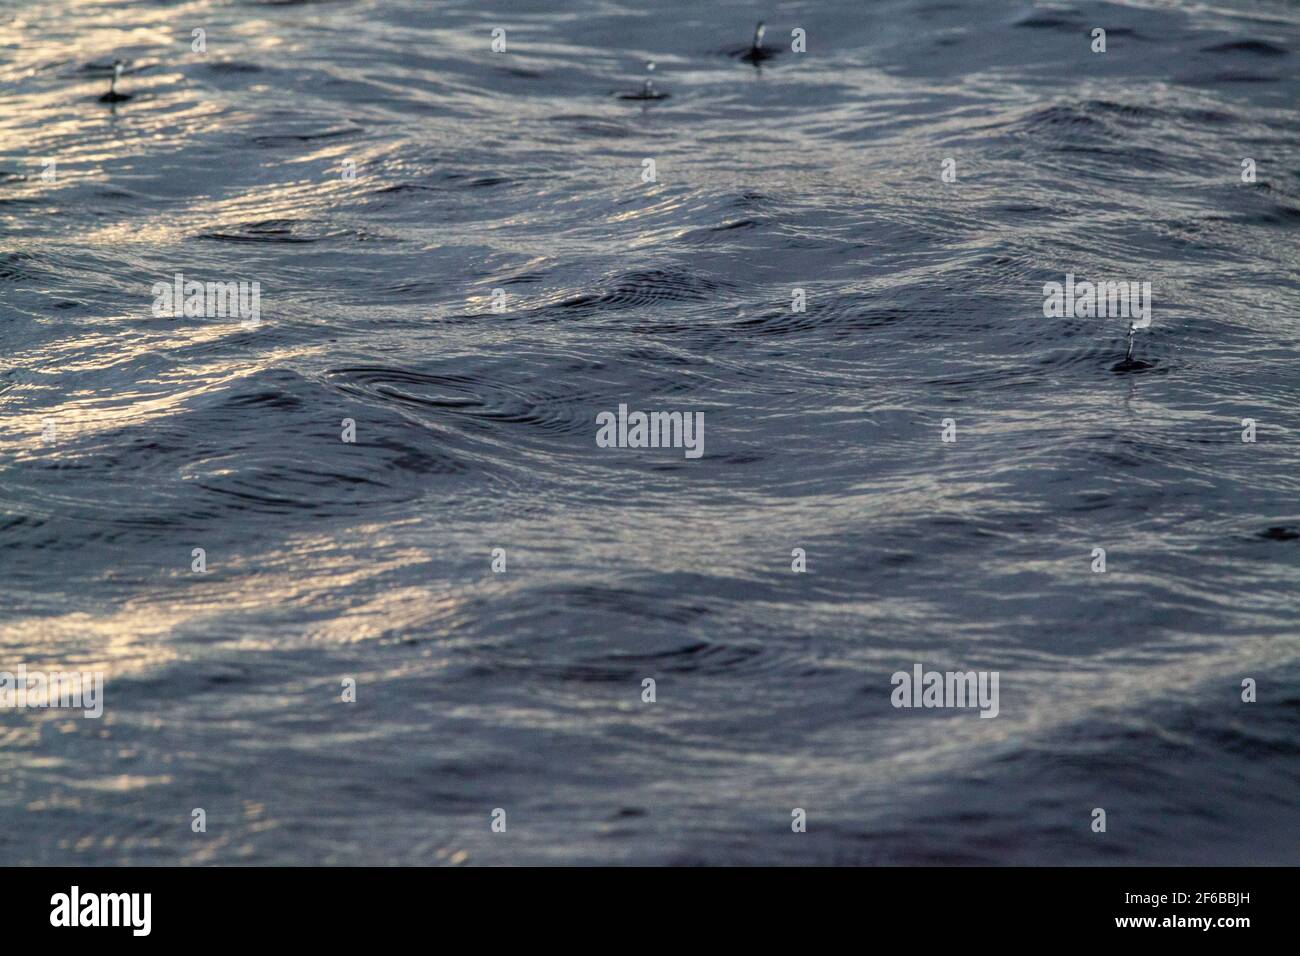 Swelling, upwelling, transitory movements on a freshwater river surface. Textured side light waves with occasional bouncing raindrops. Mood changes. Stock Photo